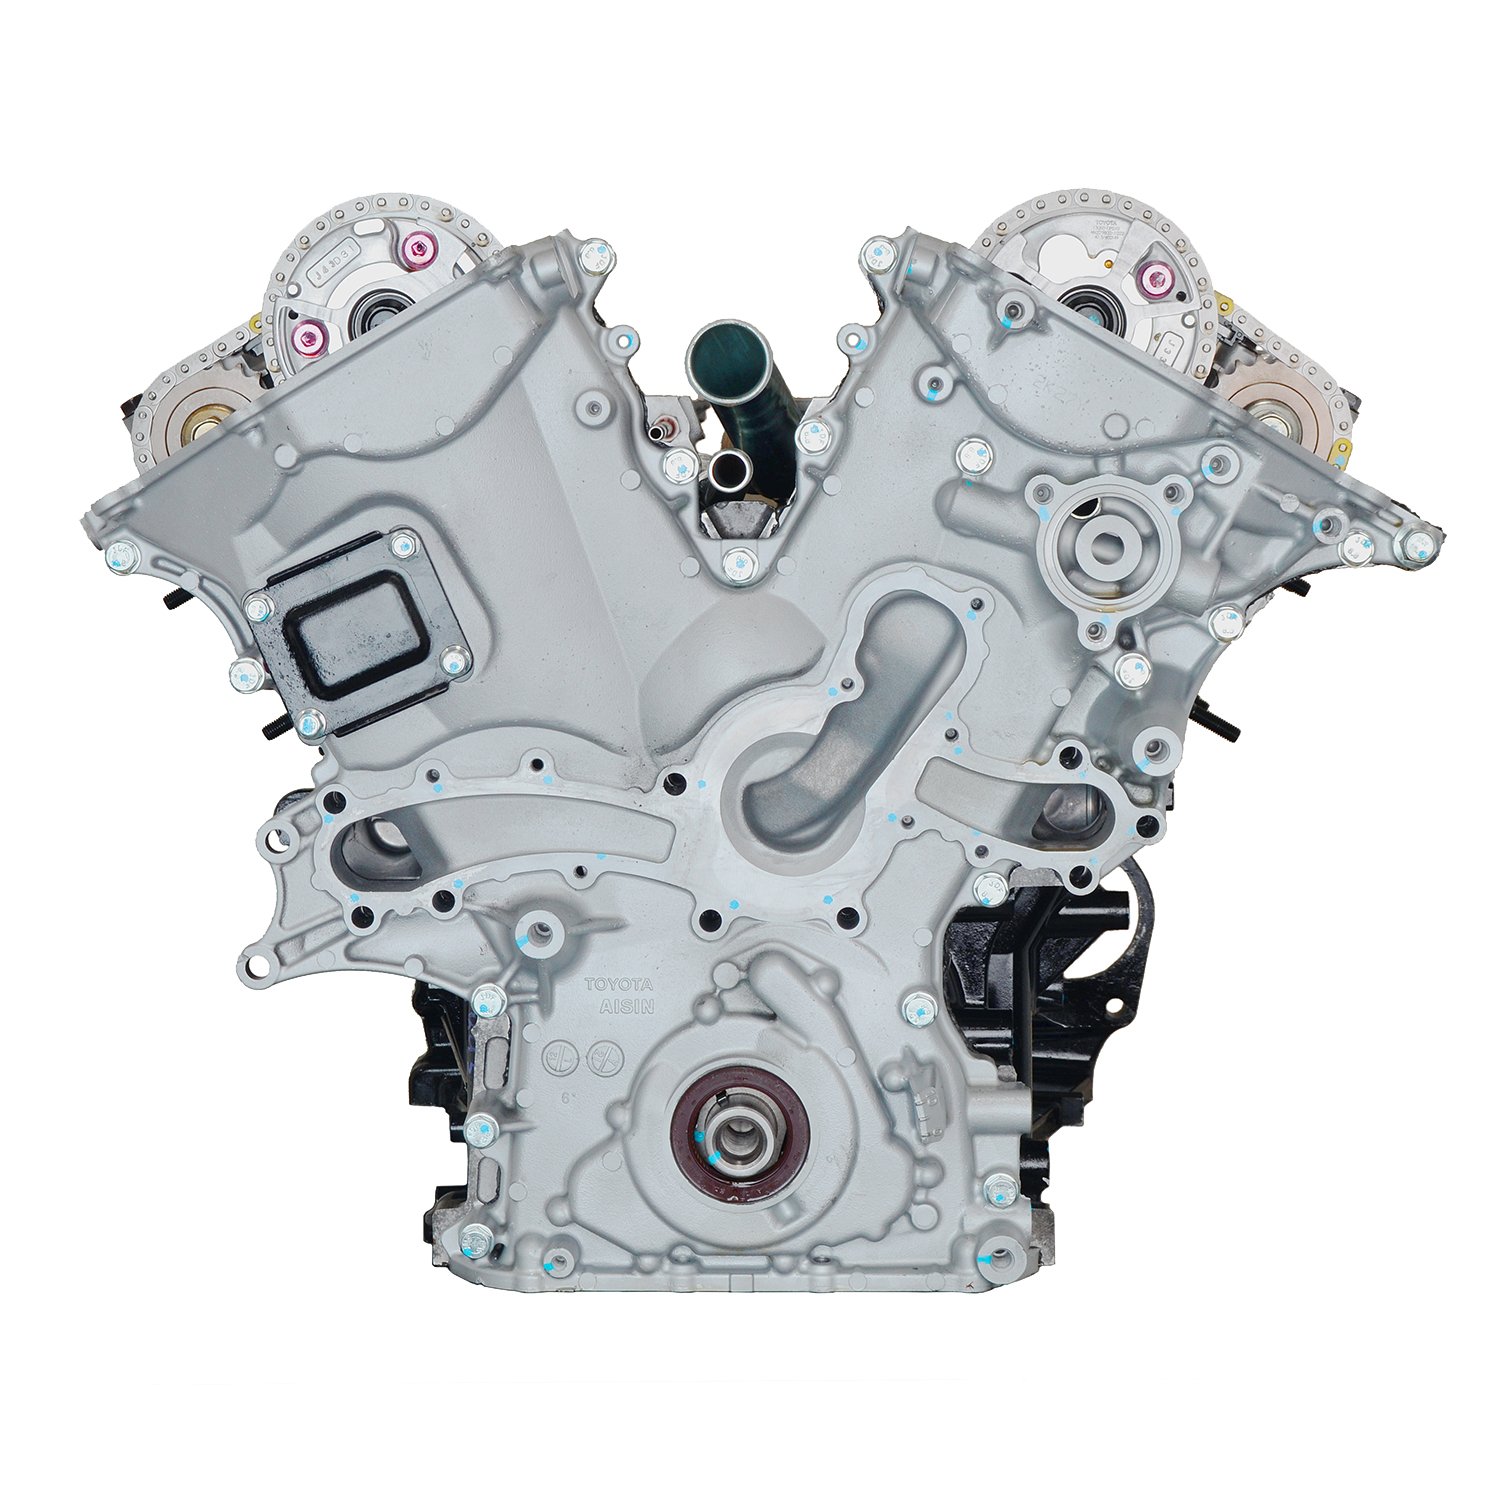 858B Remanufactured Crate Engine for 2006-2015 Toyota Tacoma & Tundra with 4.0L V6